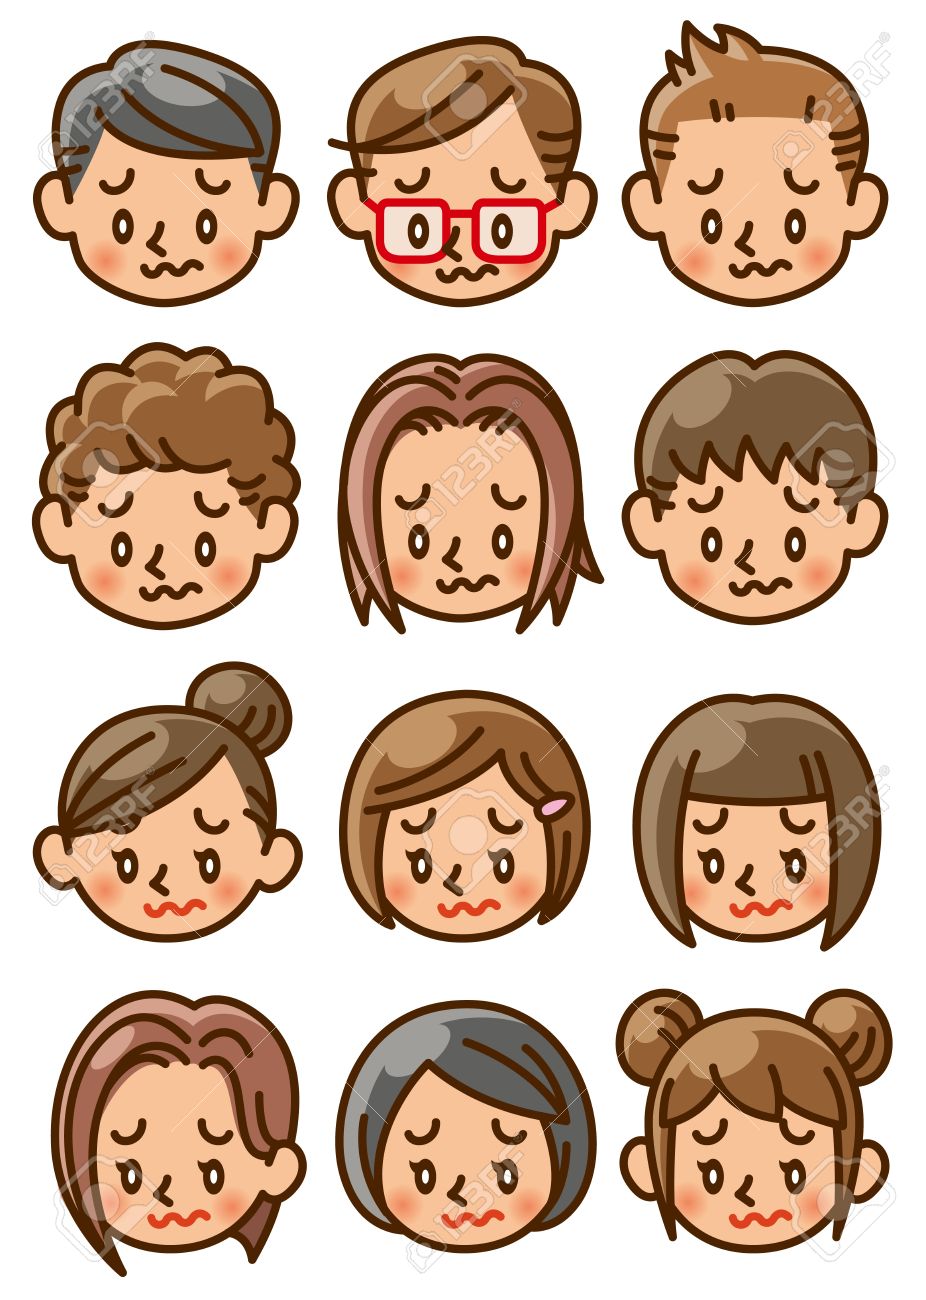 Couple Boy and Girl Cartoons Icon - Icons by Canva